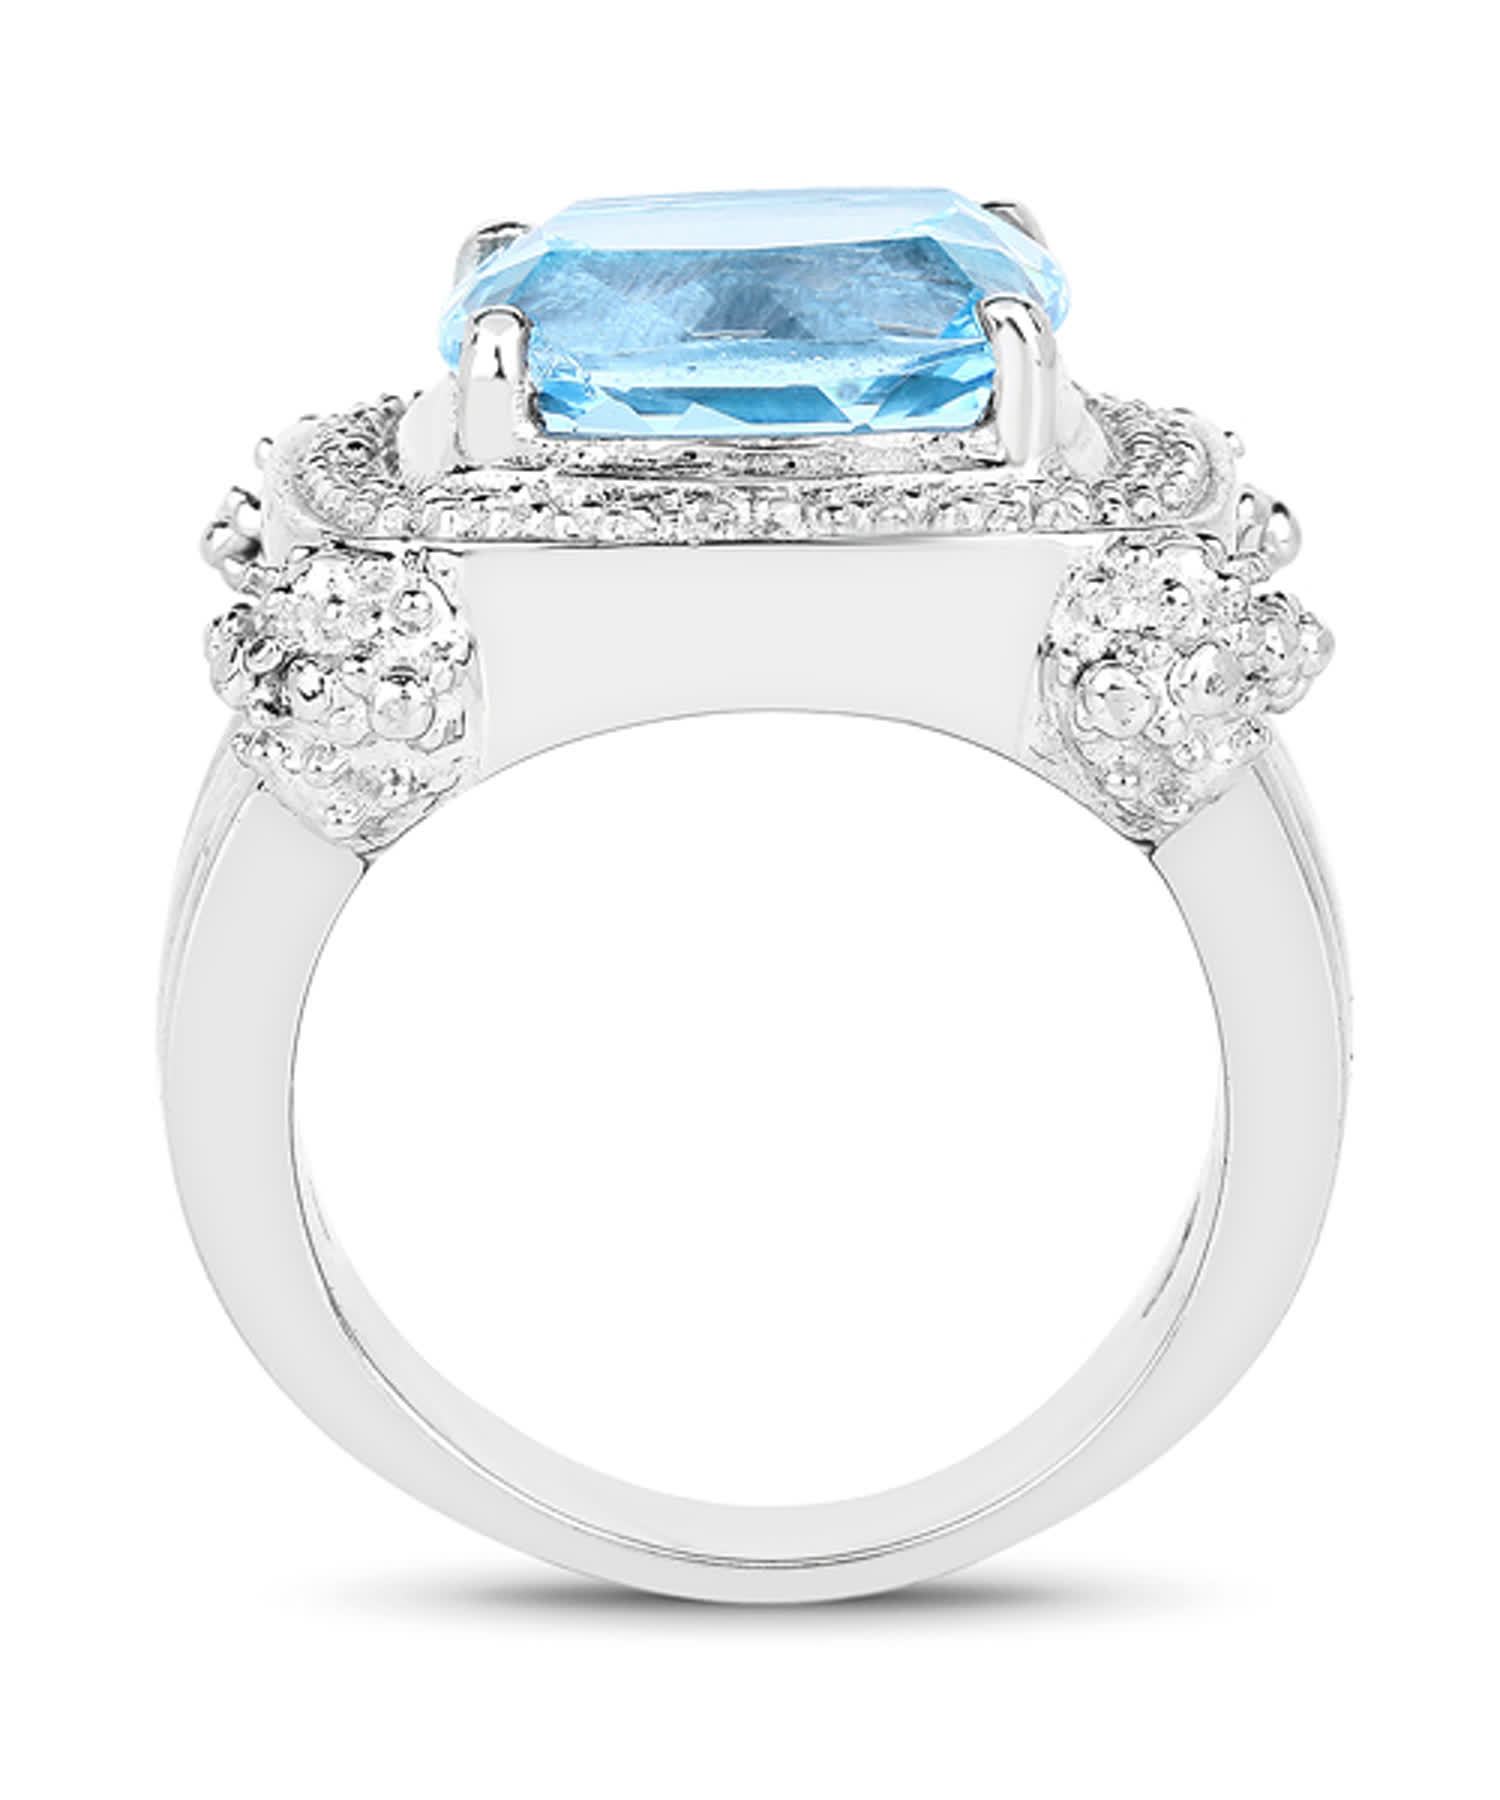 4.90ctw Natural Sky Blue Topaz Rhodium Plated Cocktail Ring View 2